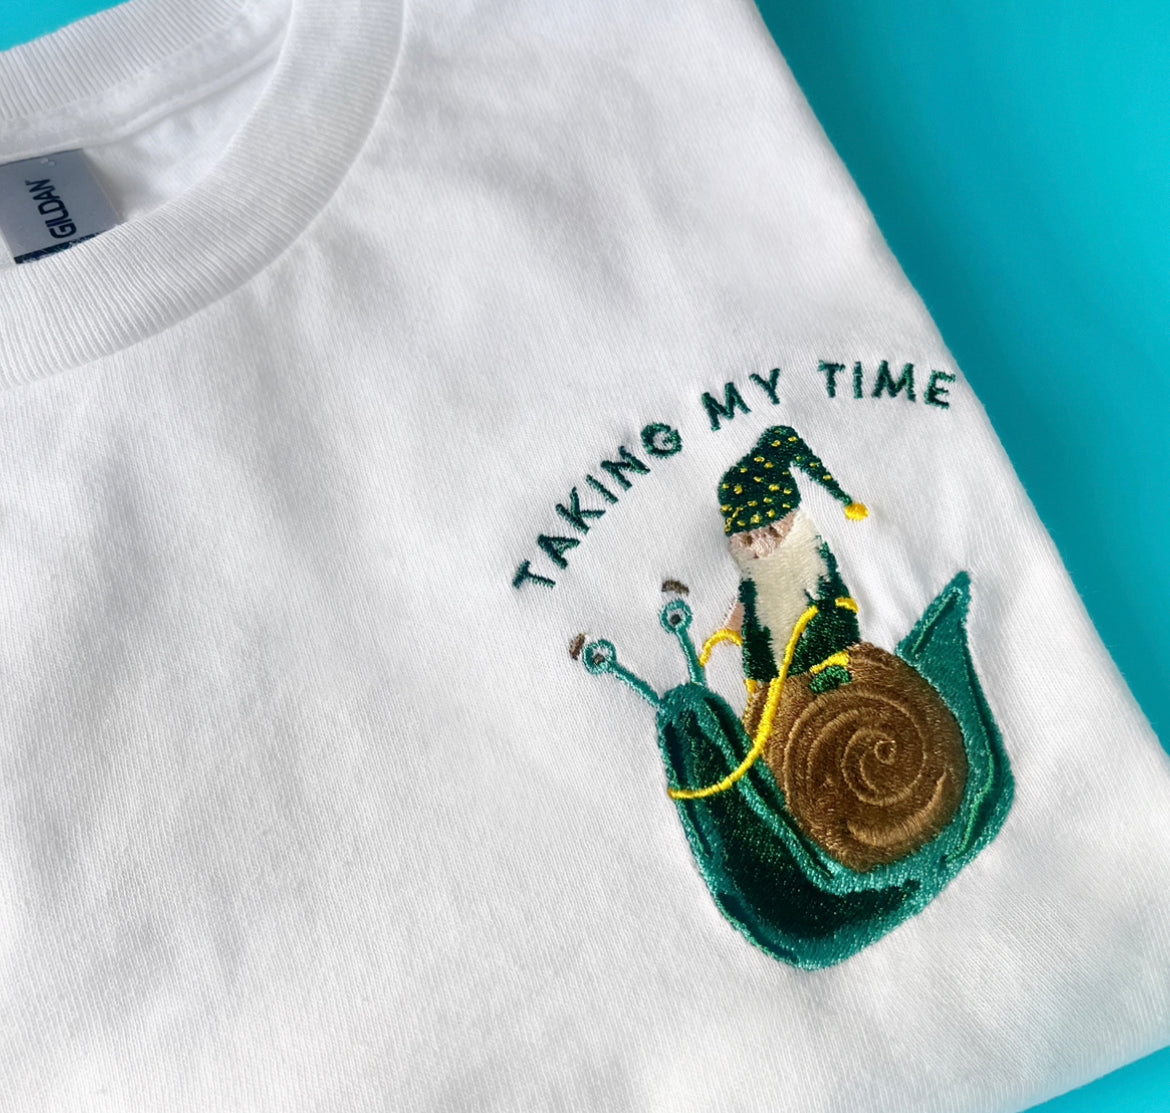 Taking My Time -  Unisex Embroidered Print